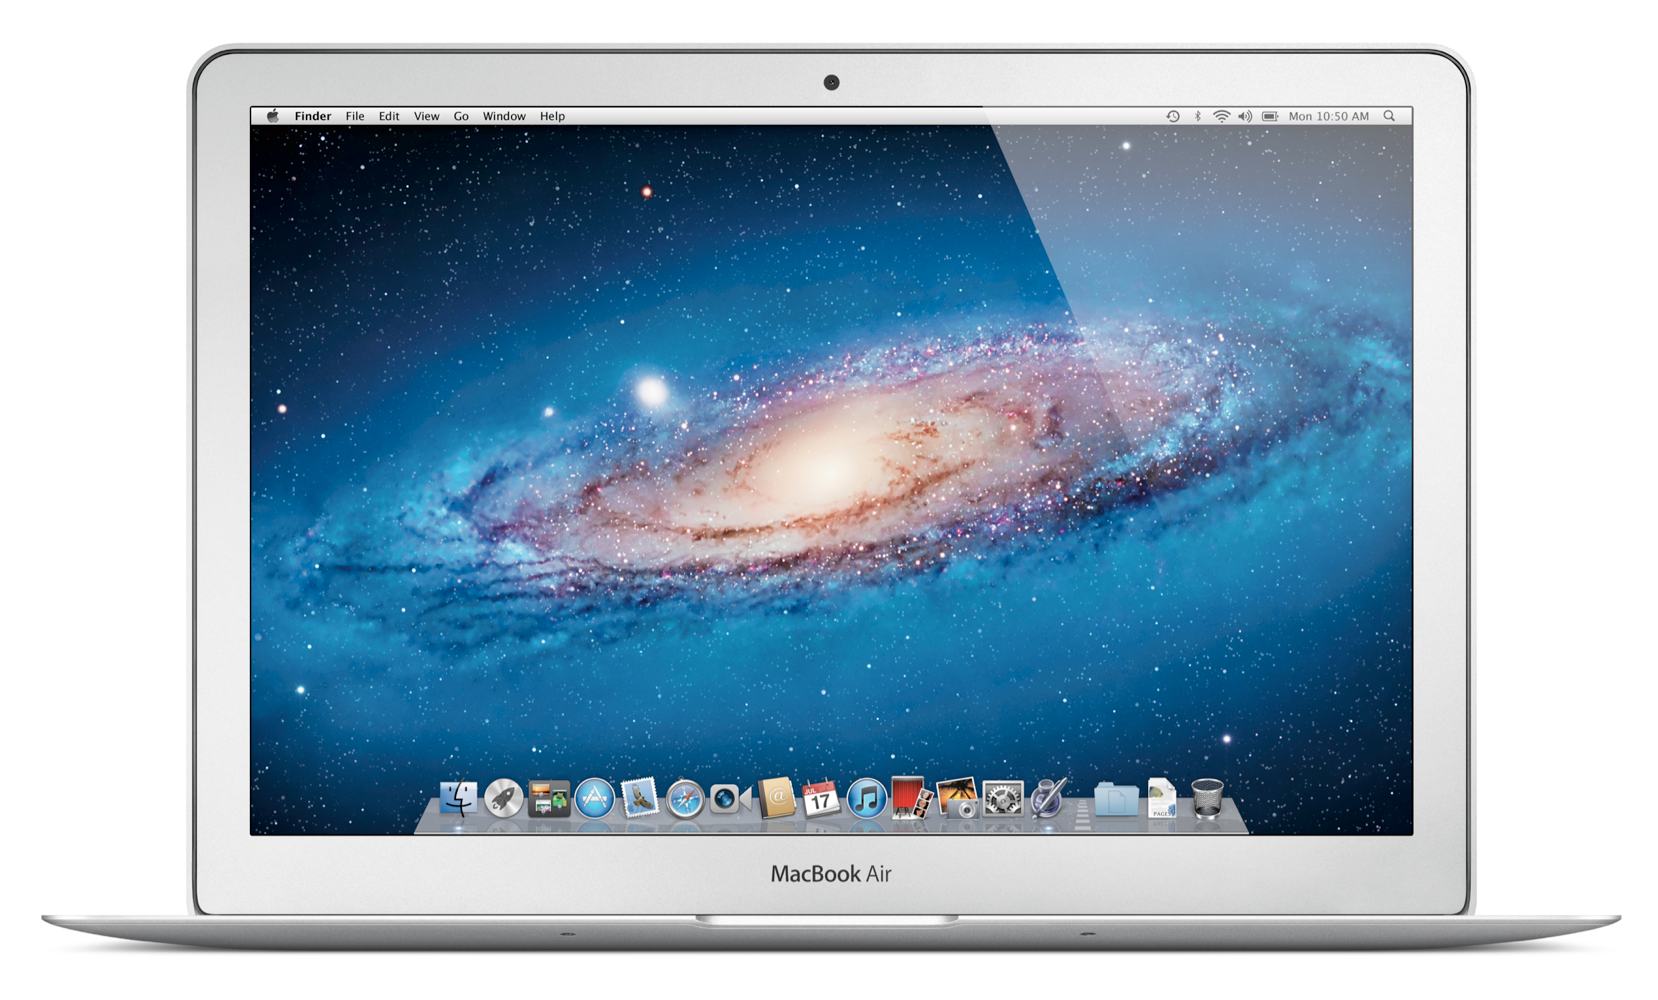 http://thetechjournal.com/wp-content/uploads/images/1206/1340008244-13inch-apple-macbook-air-available-for-preorder-3.jpg